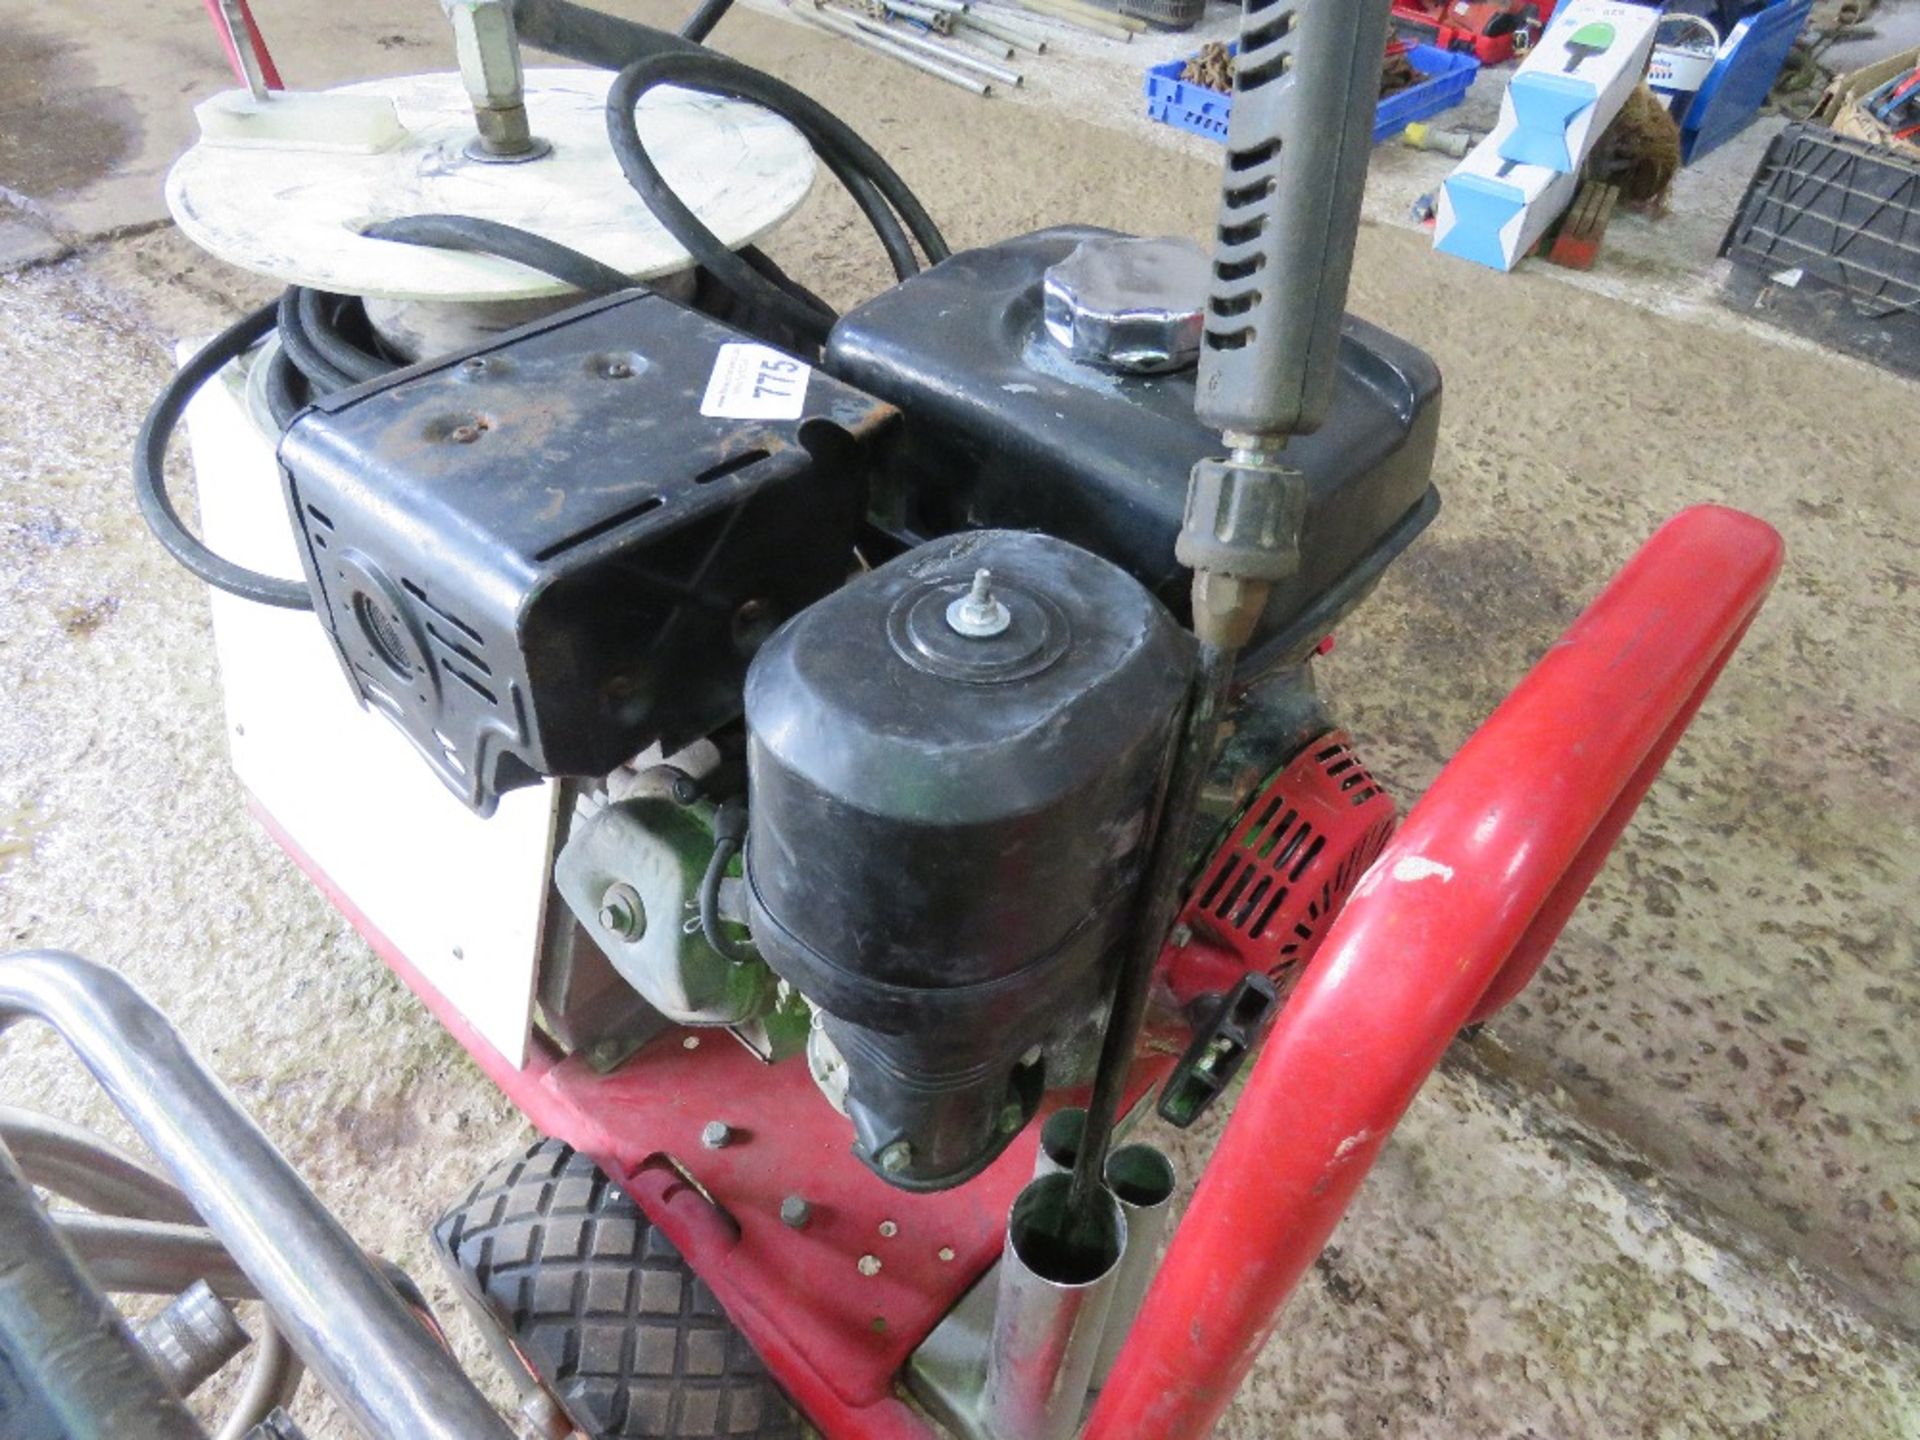 BRENDON HEAVY DUTY PRESSURE WASHER WITH HOSE AND LANCE. - Image 3 of 7